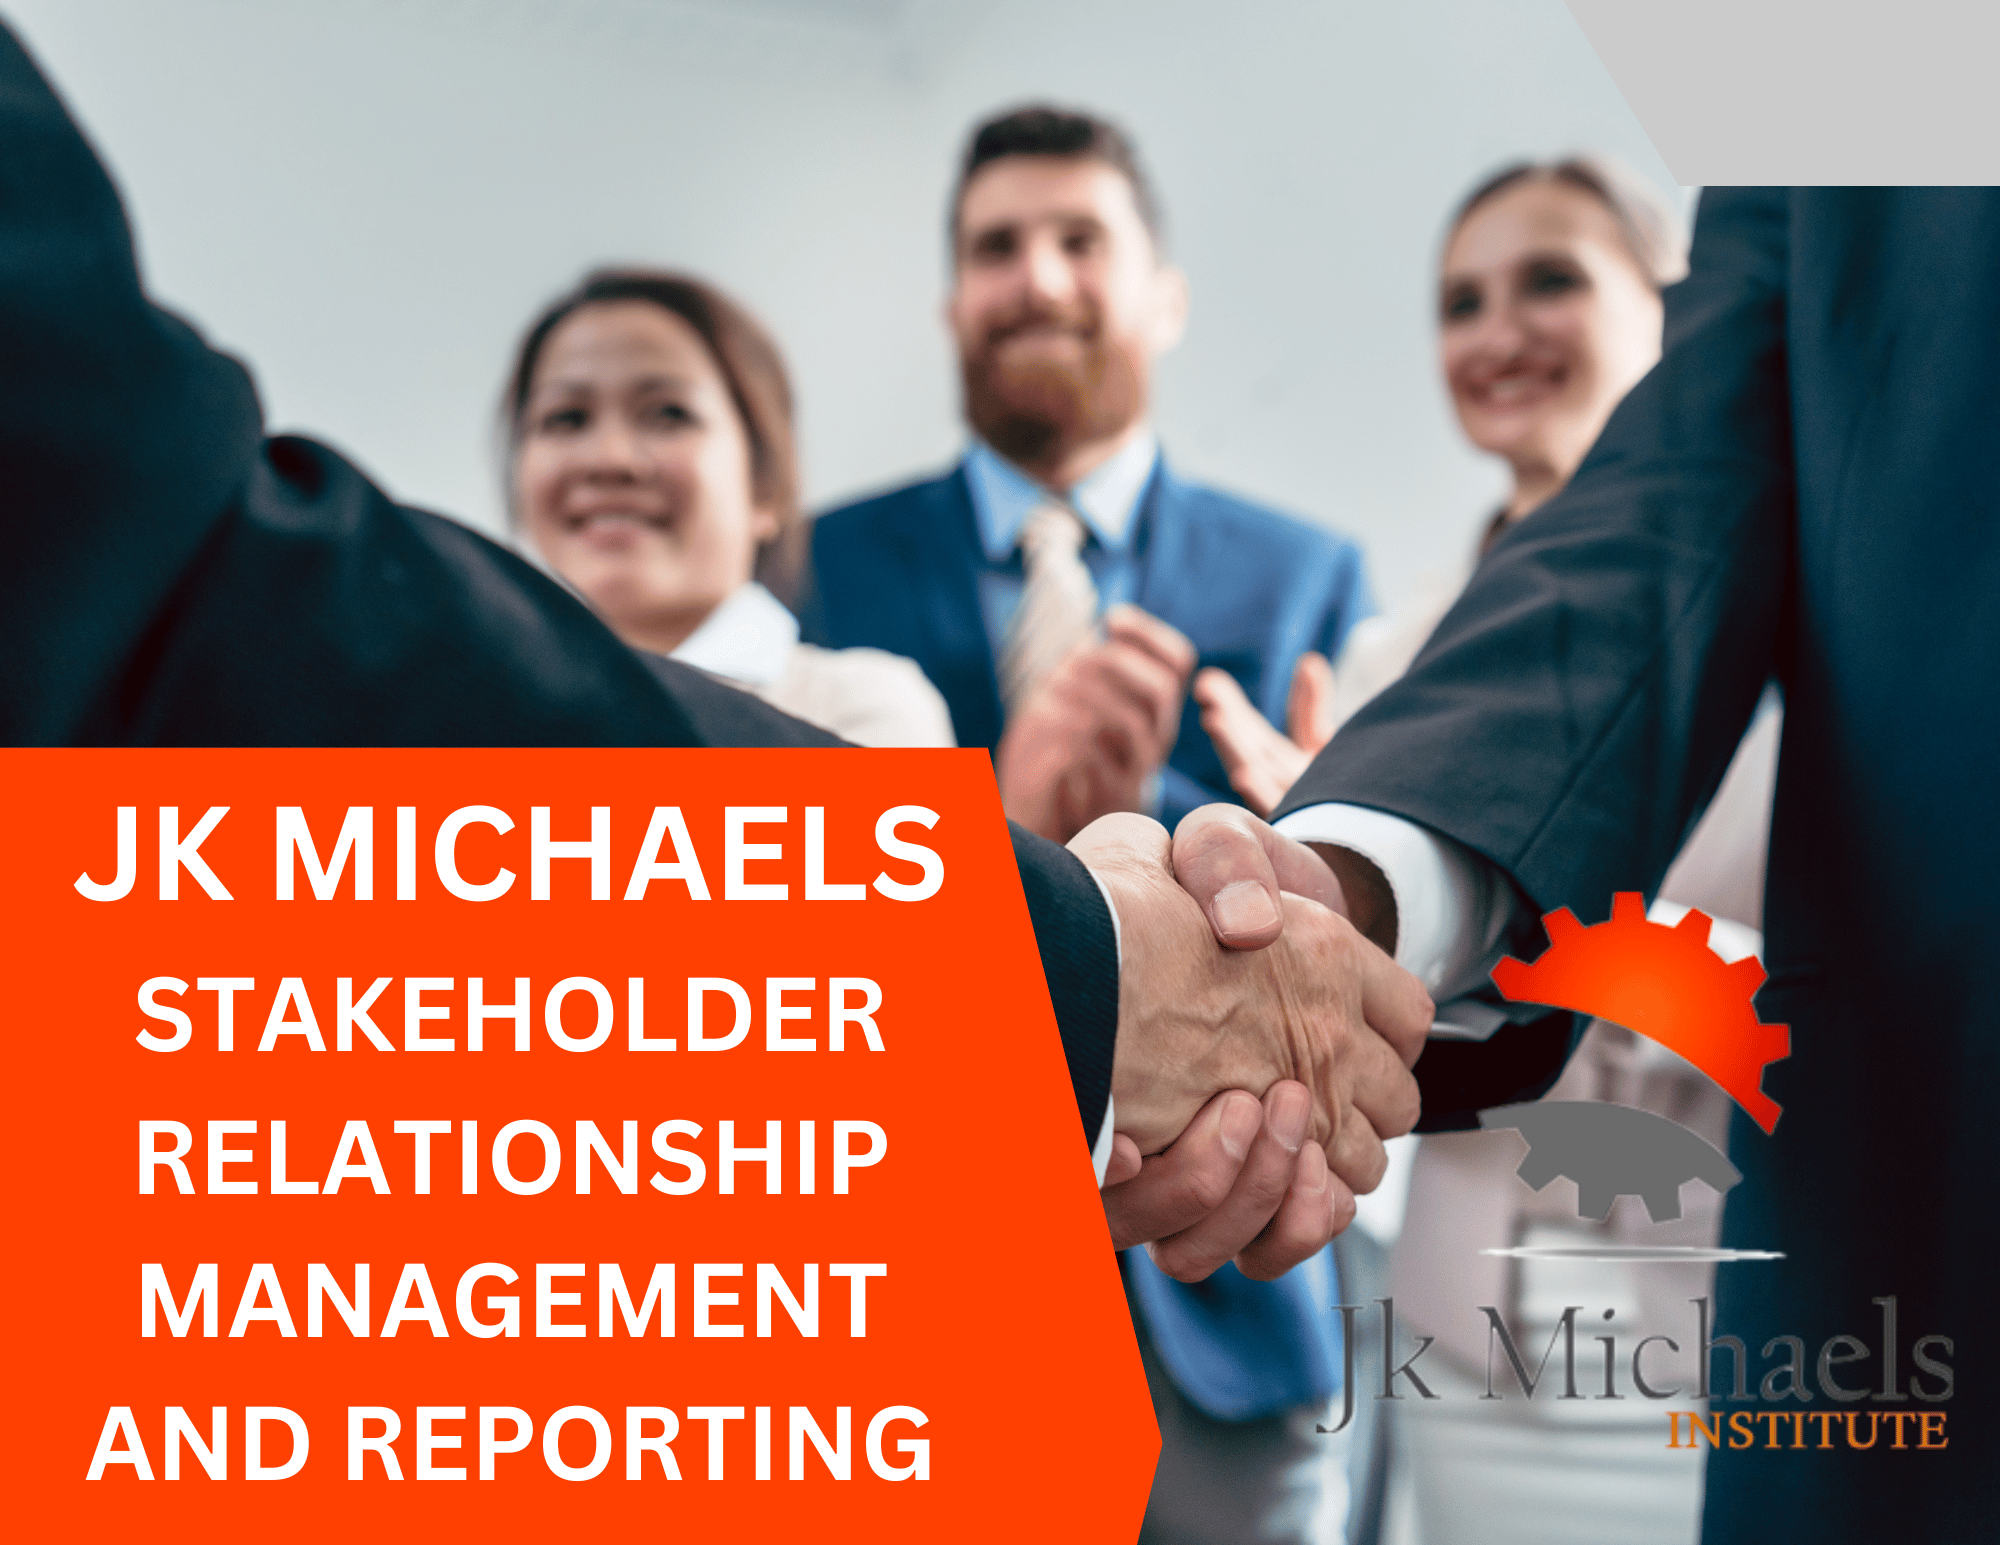 STAKEHOLDER RELATIONSHIP MANAGEMENT AND REPORTING